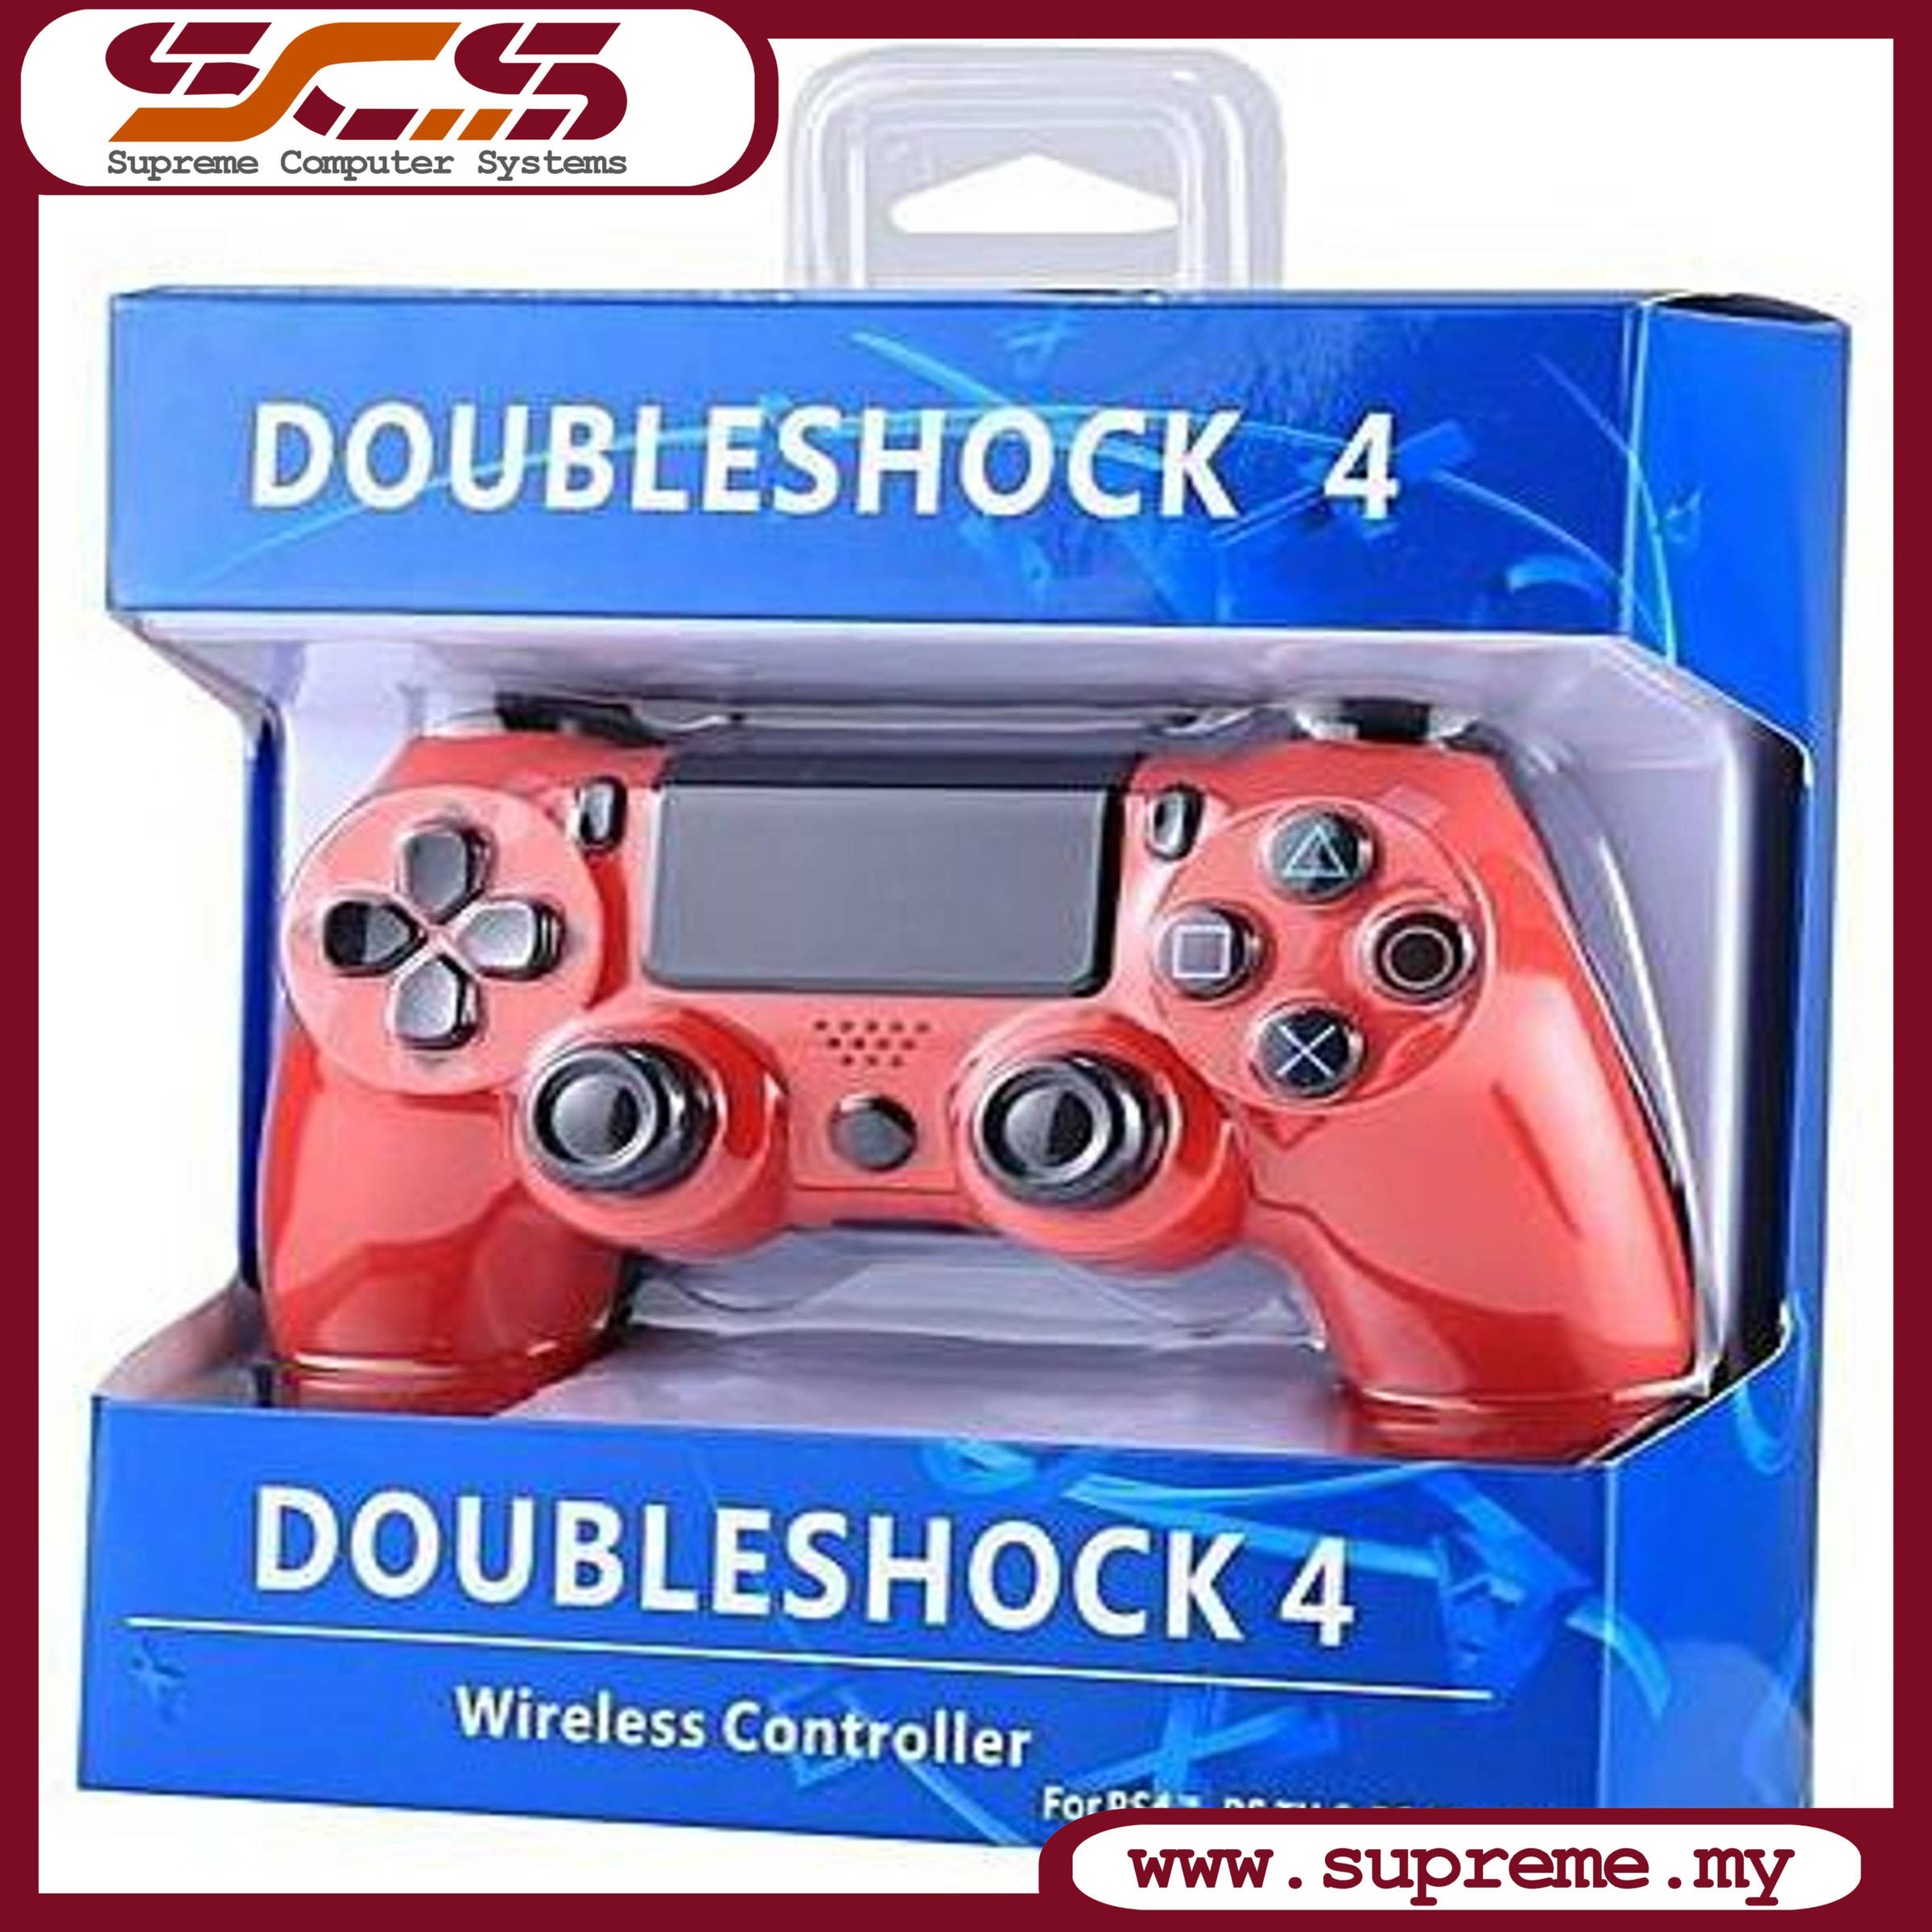 Gamepad / Joystick / Gaming Controller Doubleshock 4 for PC and PS4 (OEM) –  Supreme Computer System